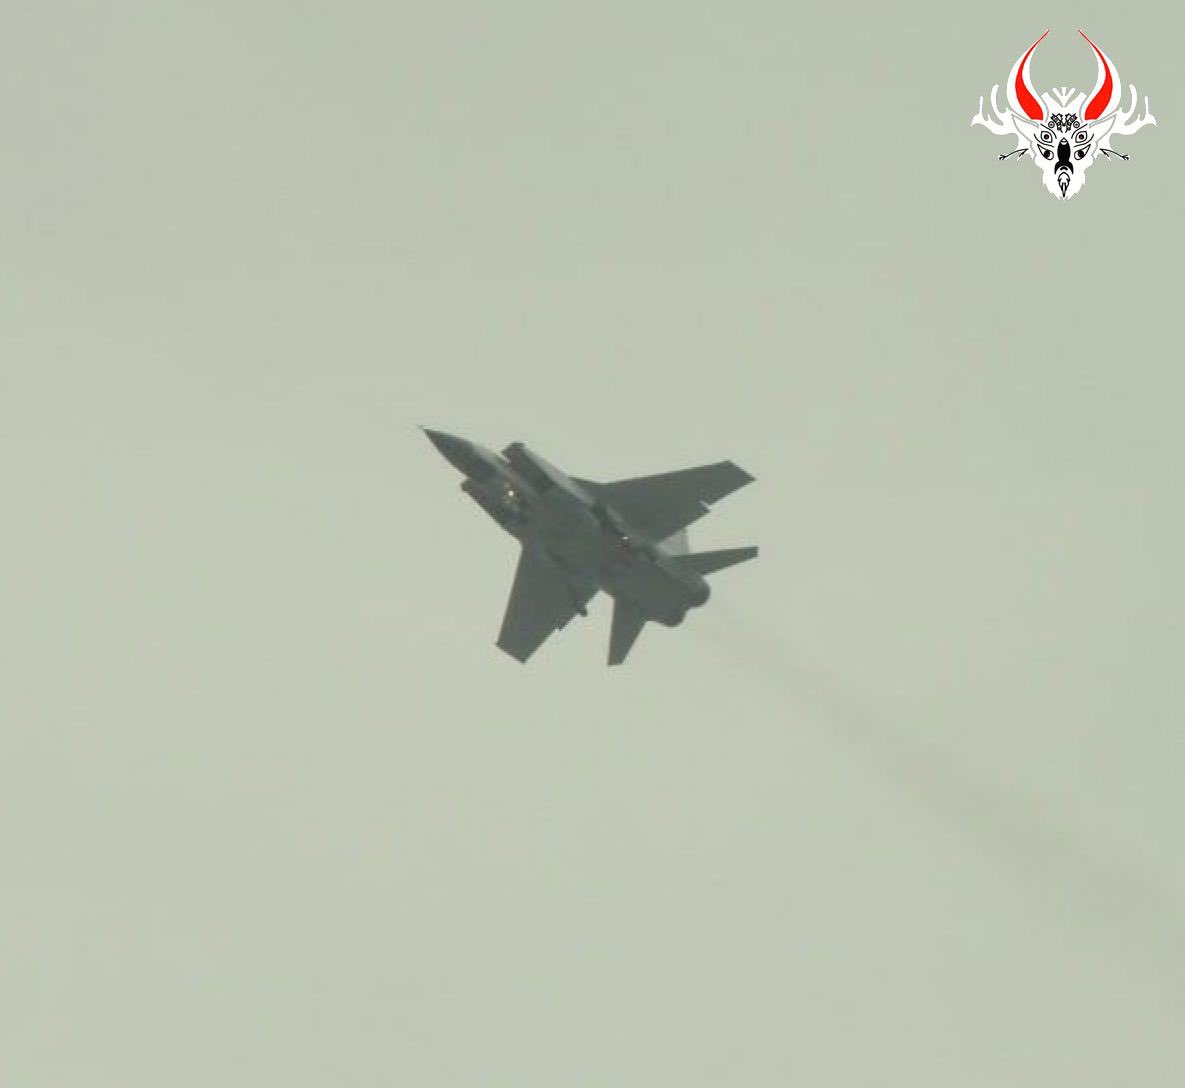 3-4 MiG-31 fighters (empty with no missiles) have been spotted over Minsk in the past 30 minutes